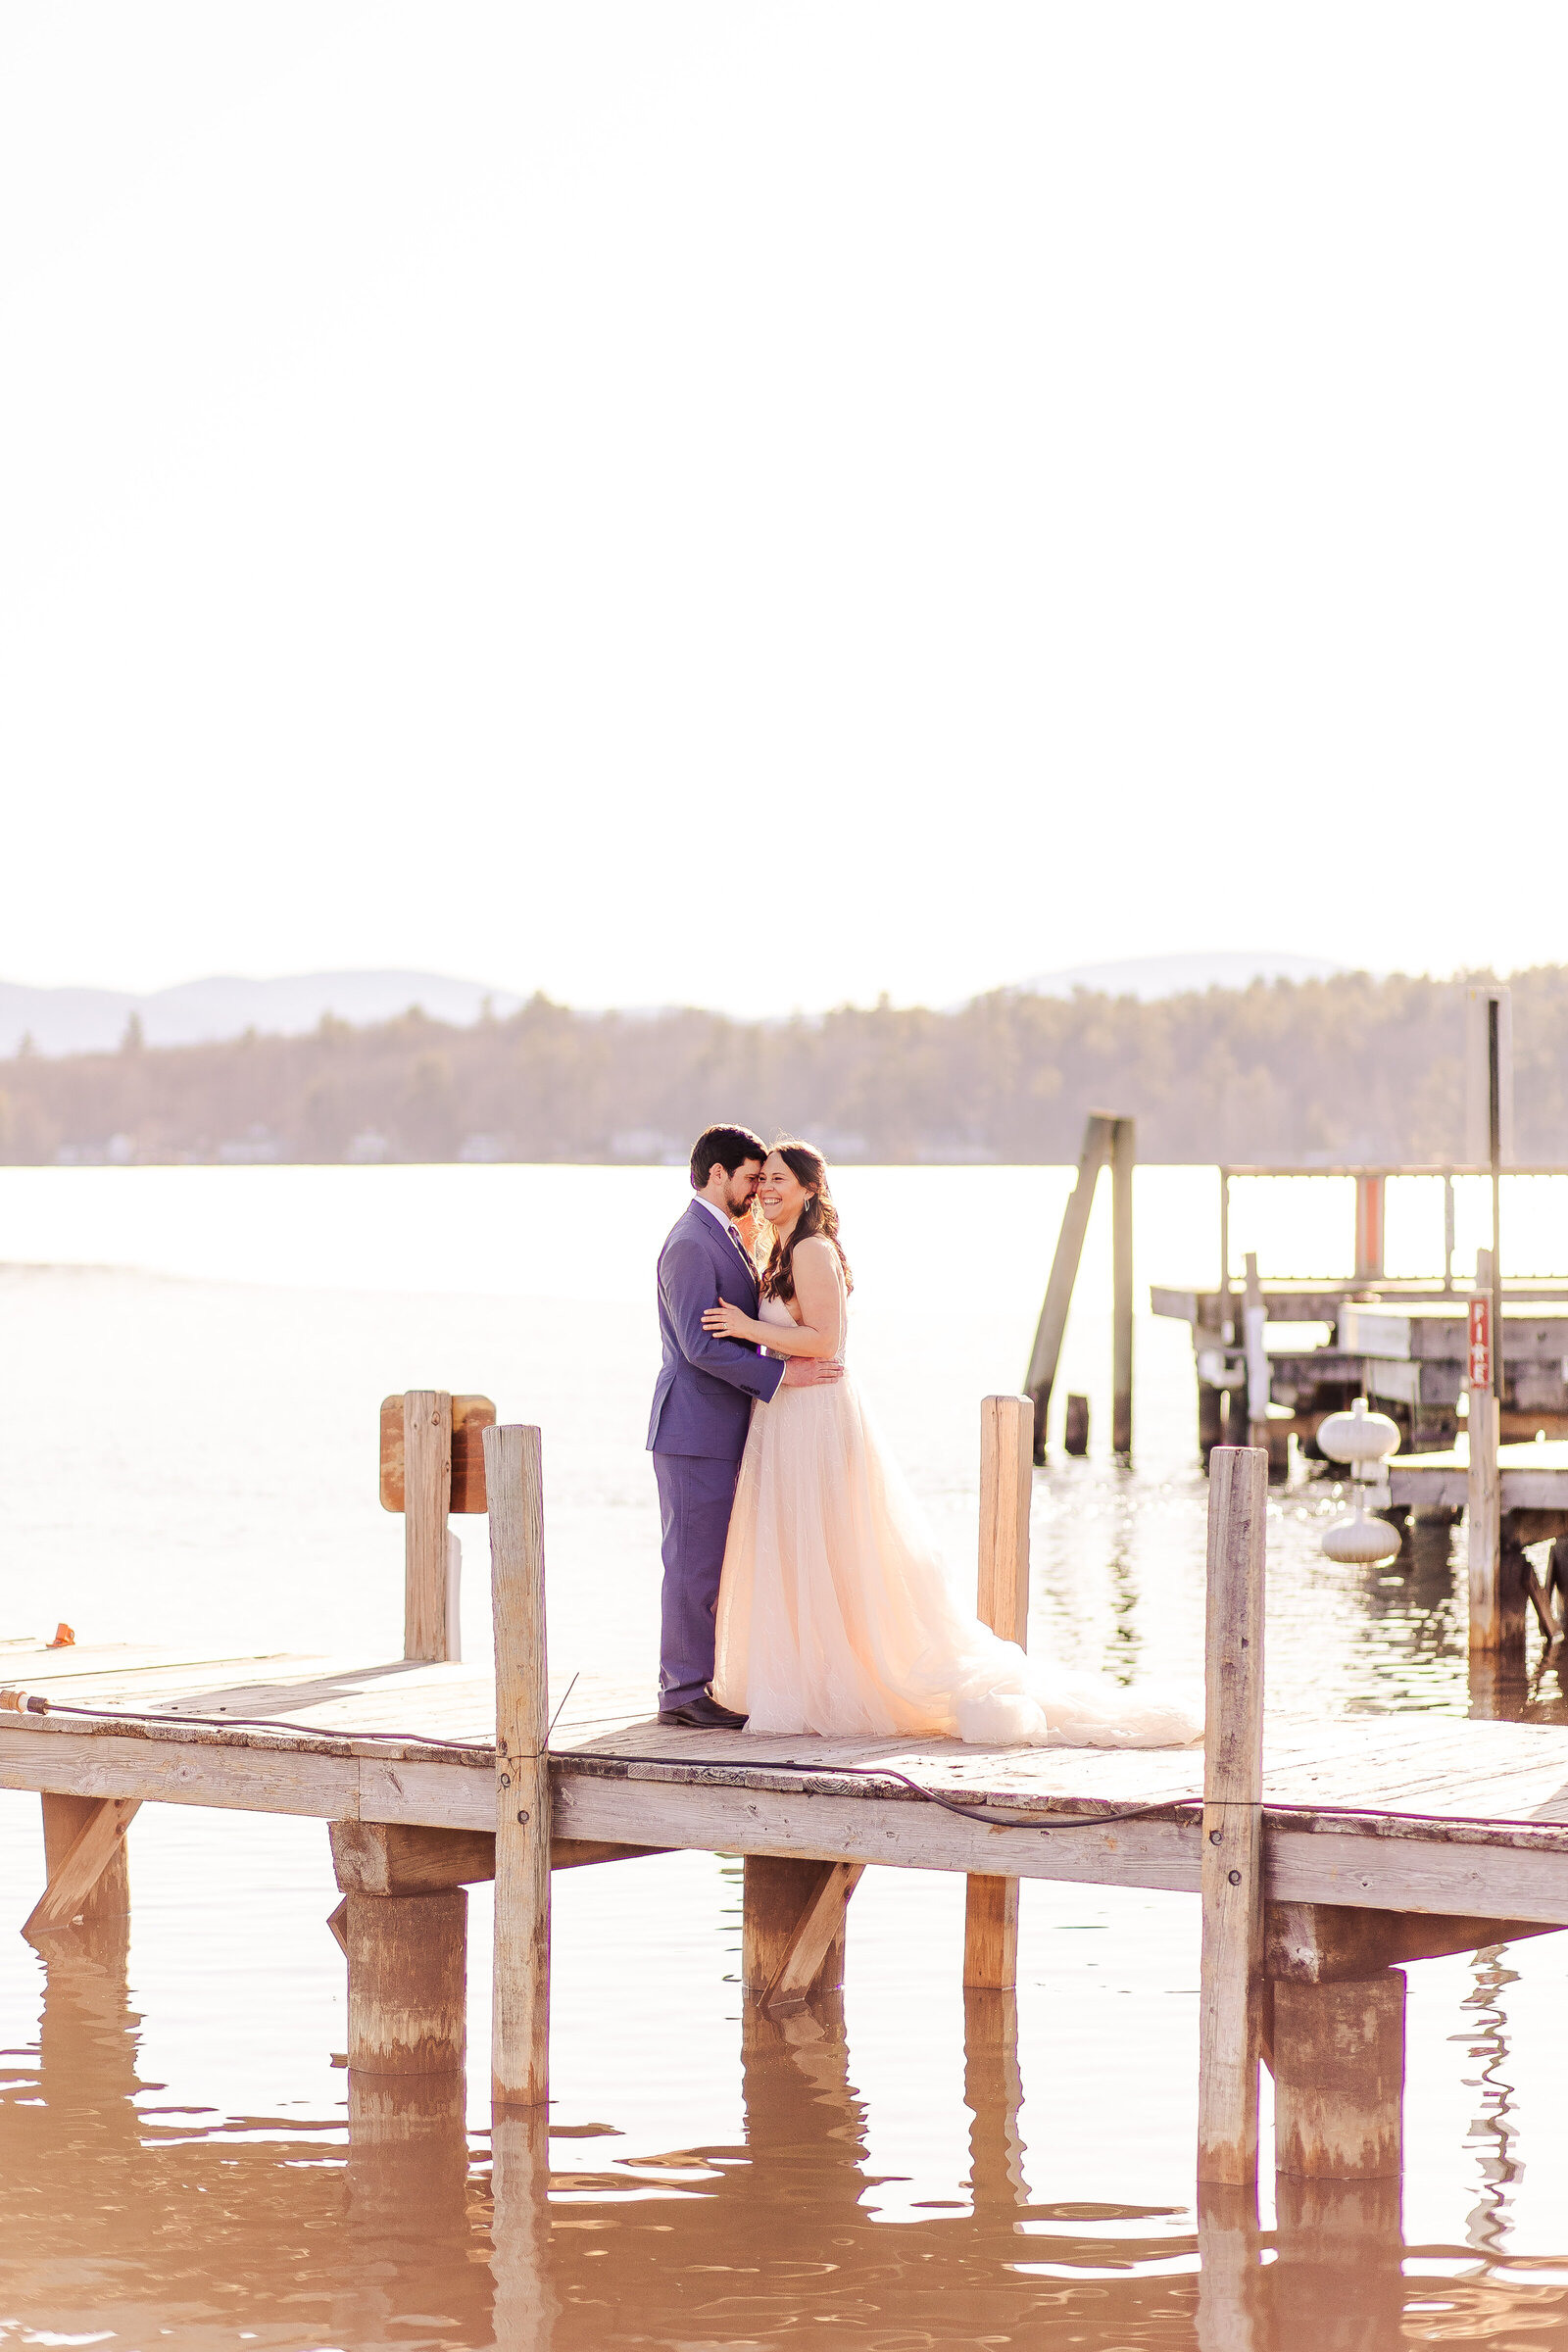 A Dockside Couple's Session in Wolfeboro, New Hampshire (48 of 81)